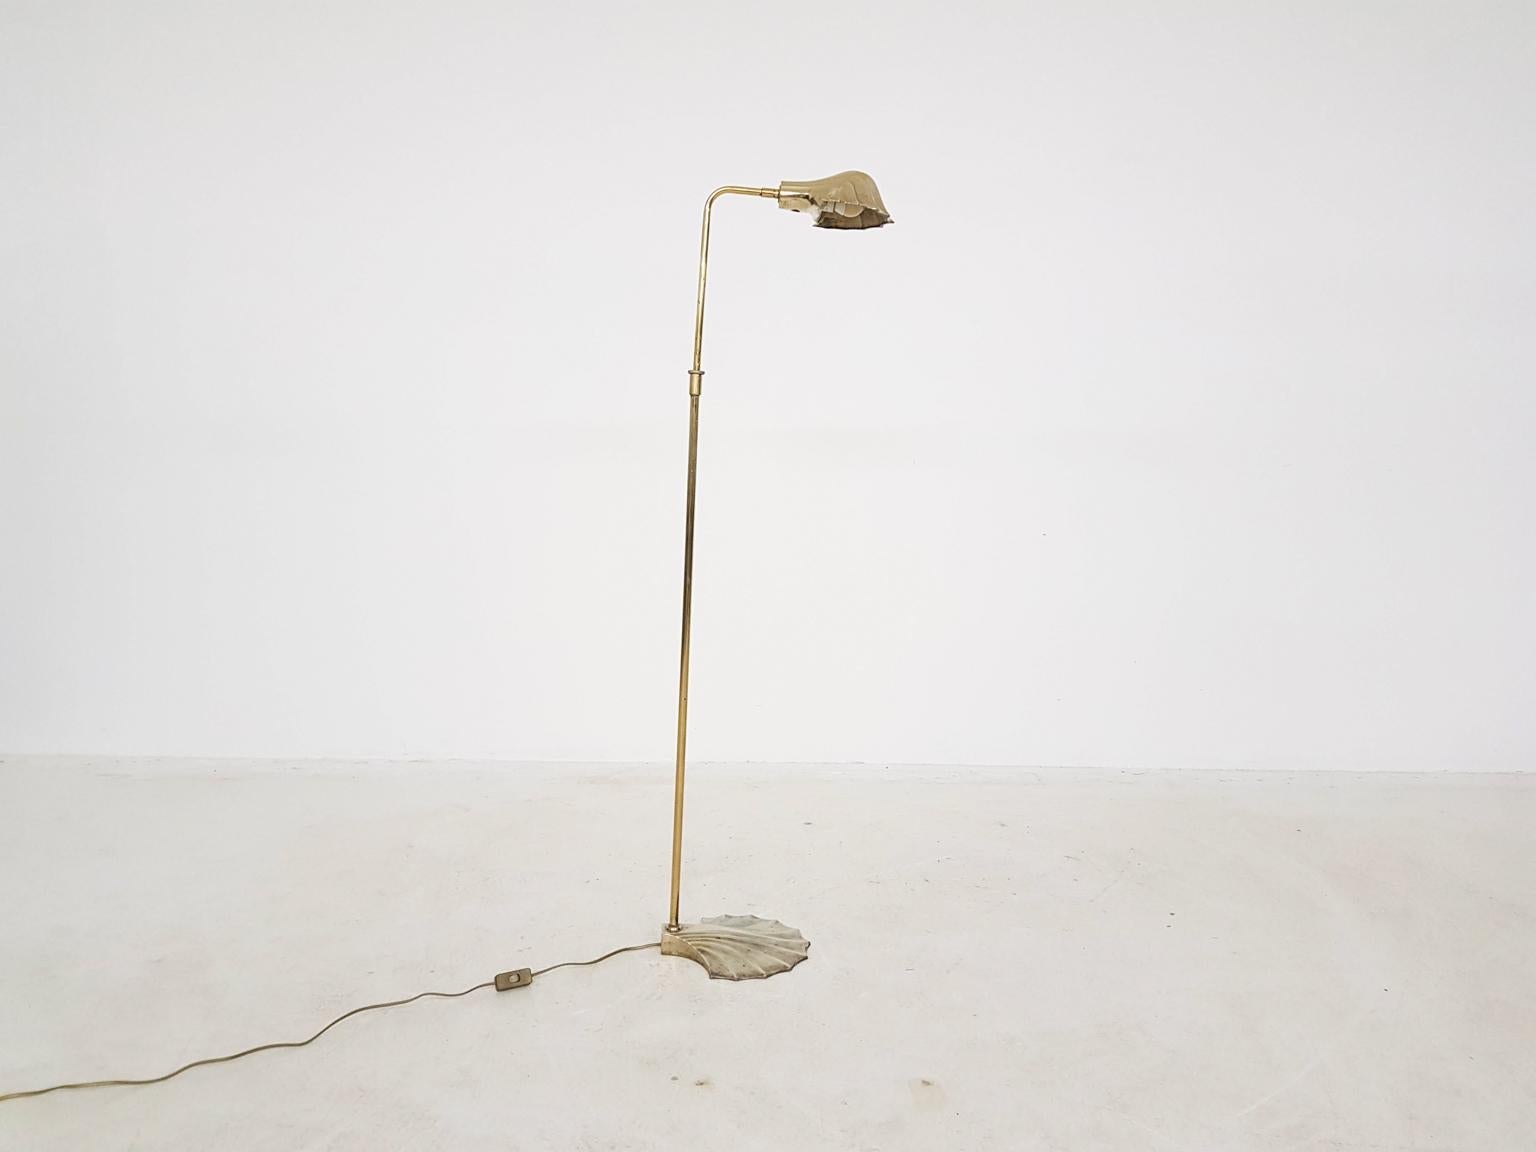 Solid brass floor lamp. Shell shaped foot and lamp shade. Lamp shade can be adjusted to left and right and the top of the light can rotate, when the foot stays still.